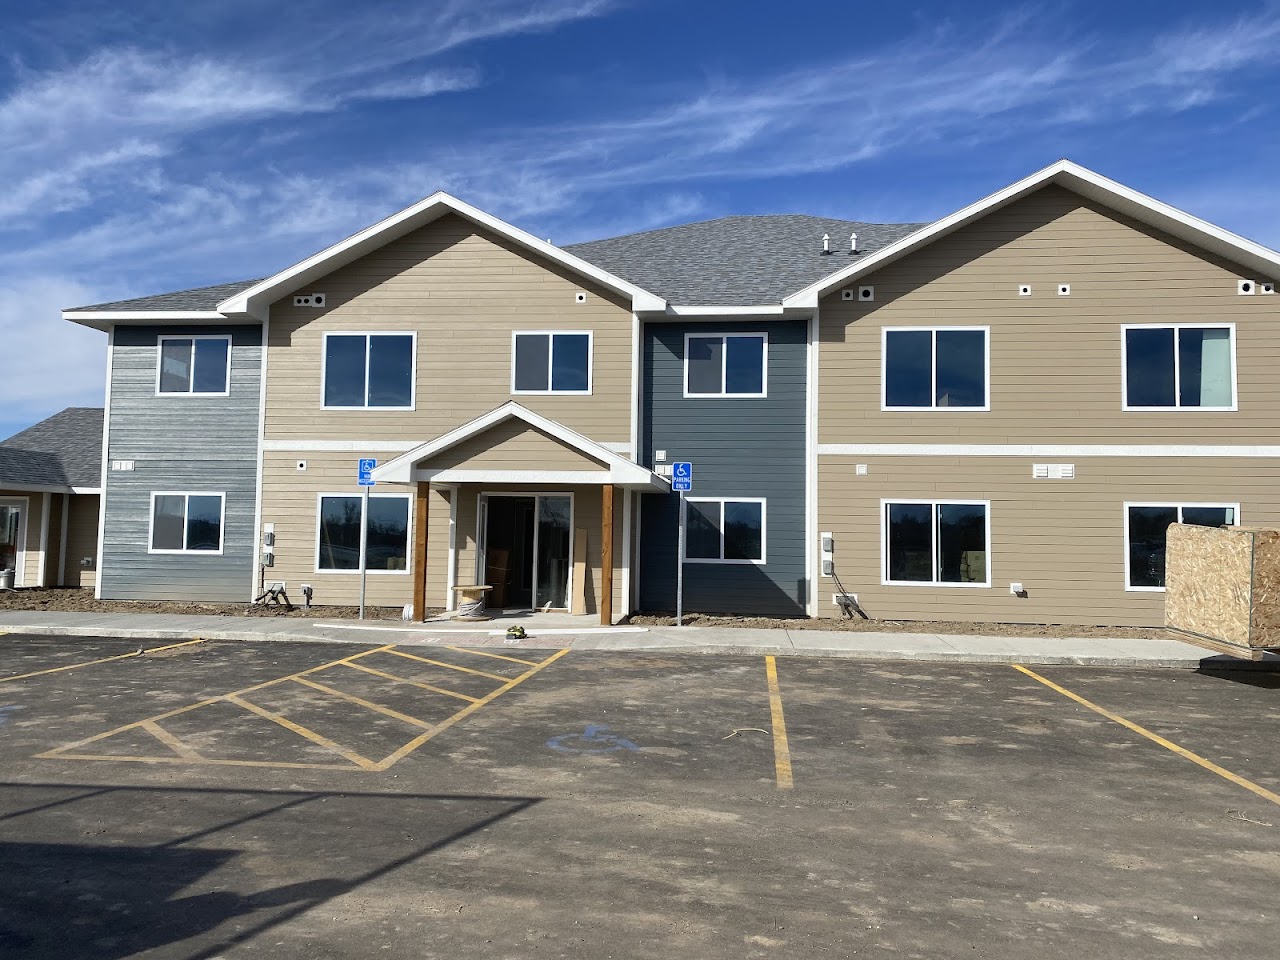 Photo of PLATTE RIVER APARTMENTS. Affordable housing located at 800 W. RICHARDS STREET DOUGLAS, WY 82633